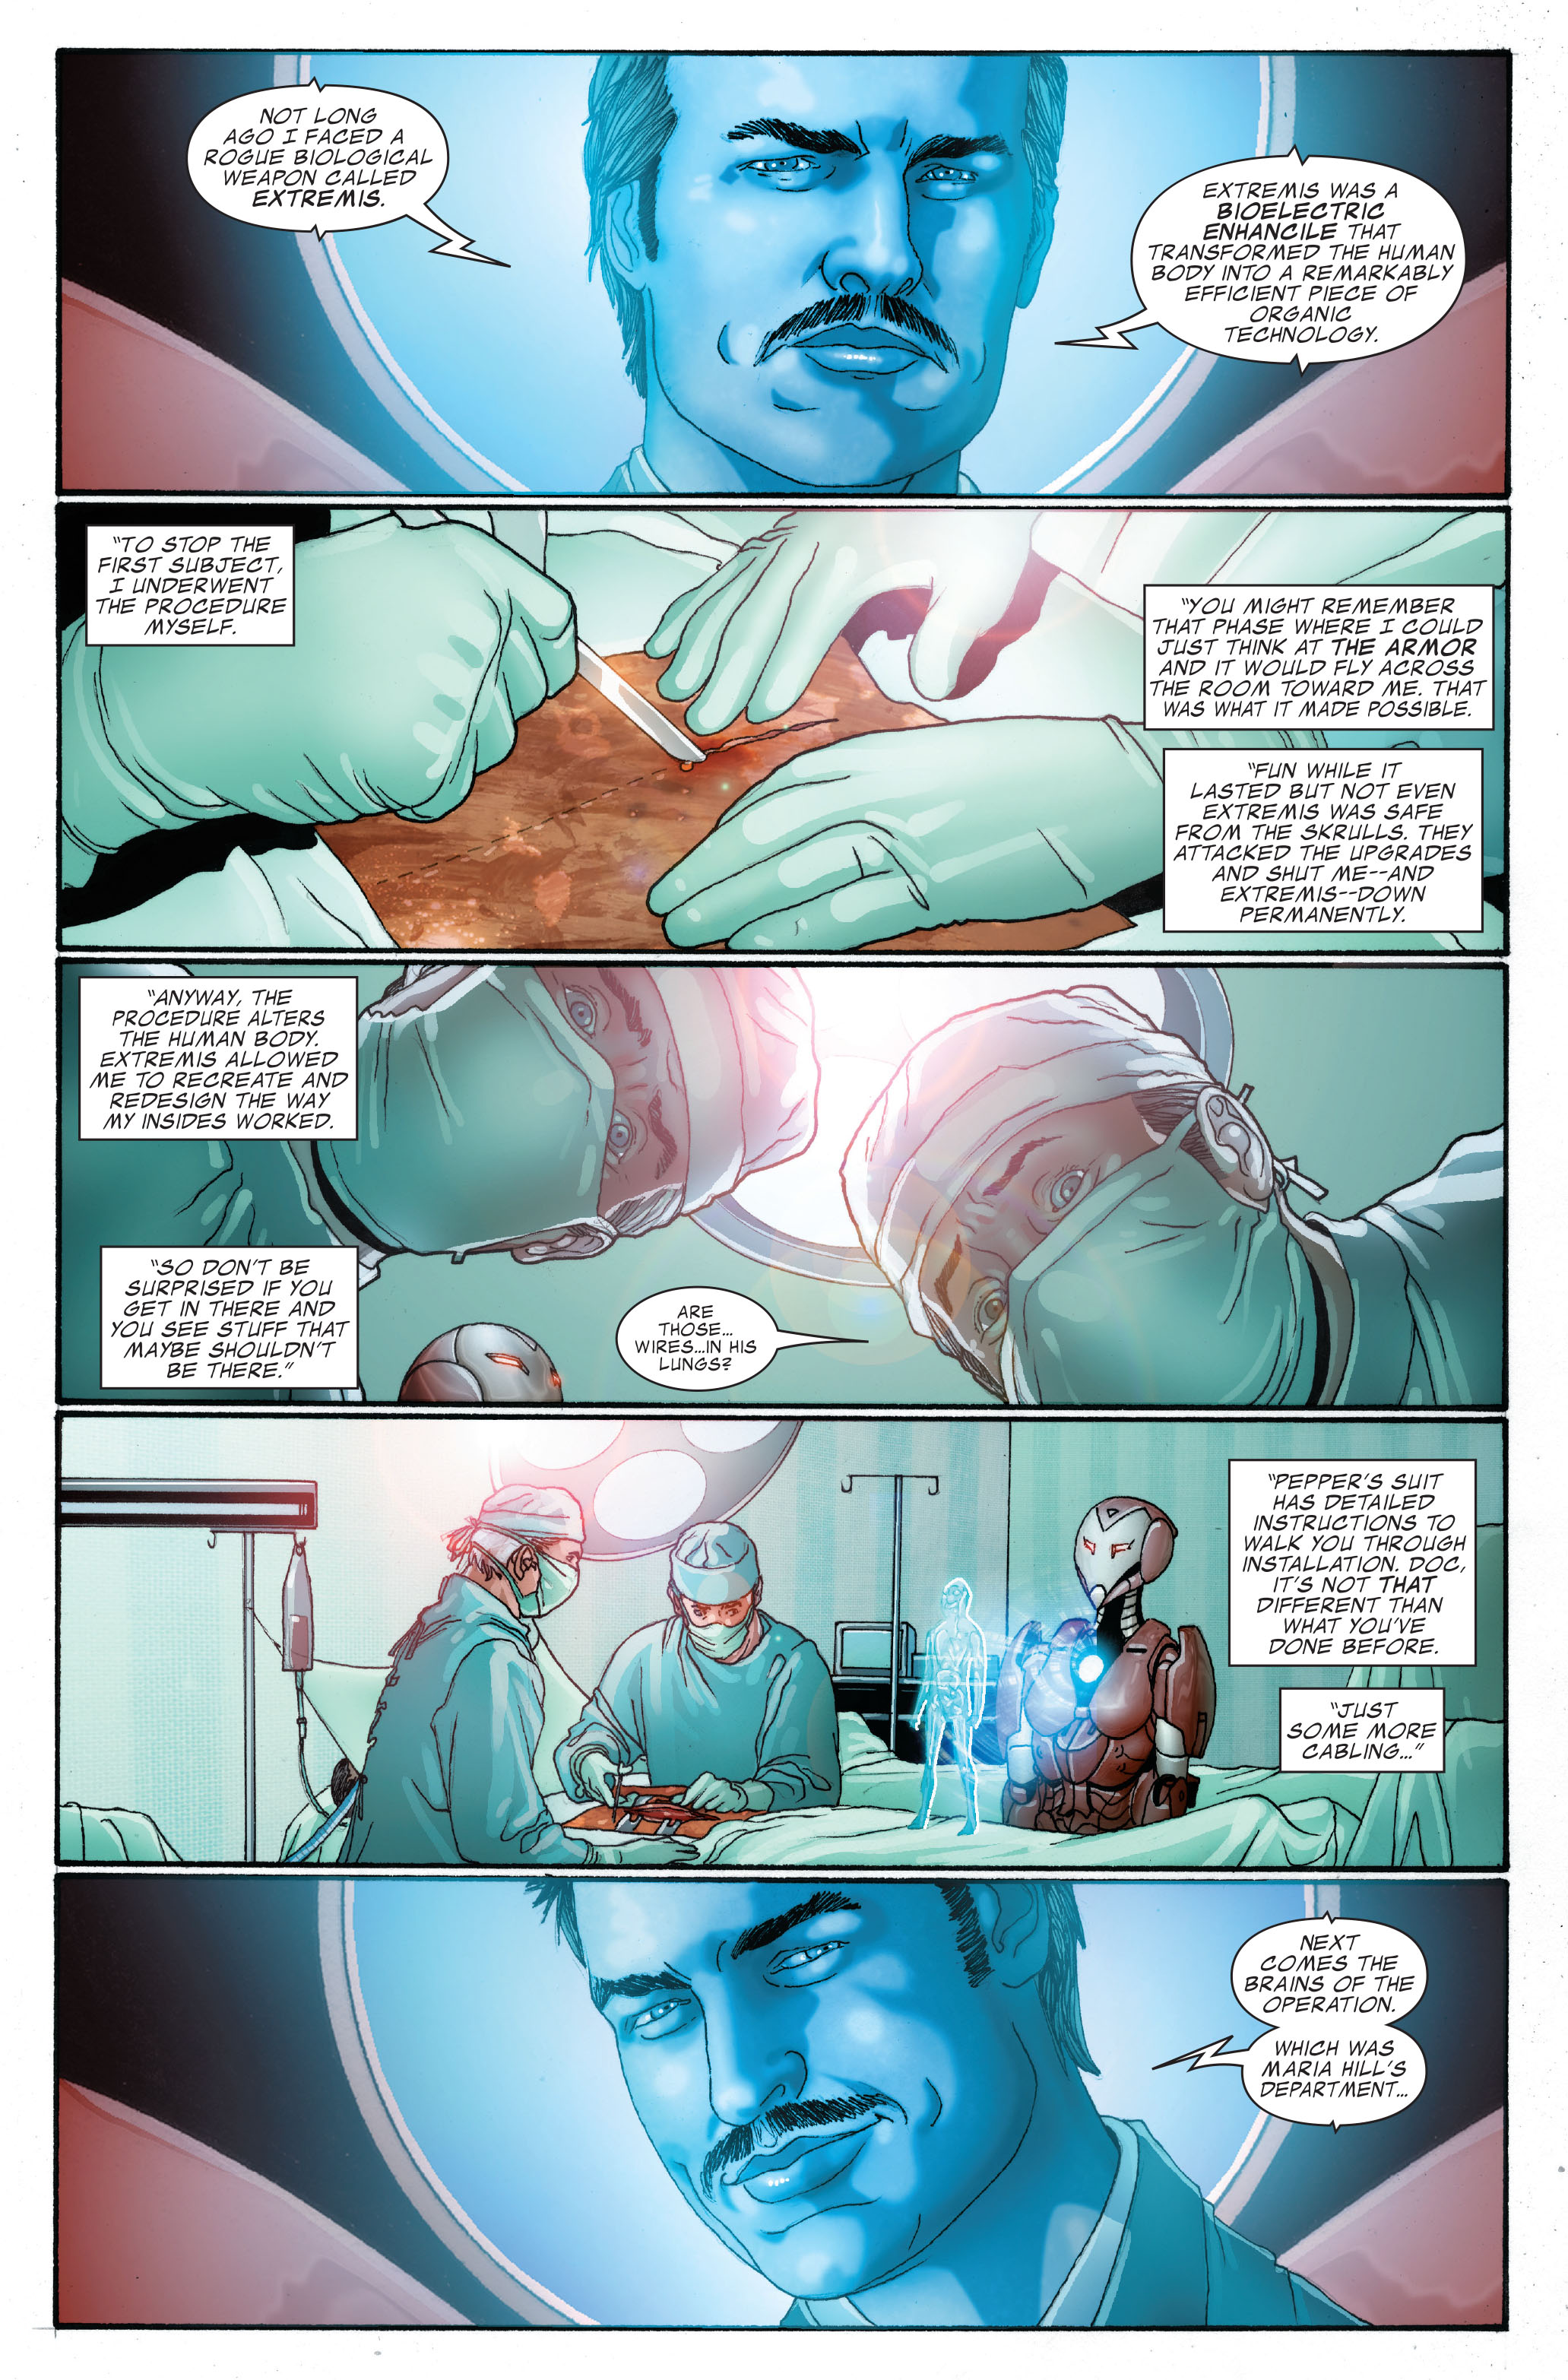 Invincible Iron Man (2008) 21 Page 12